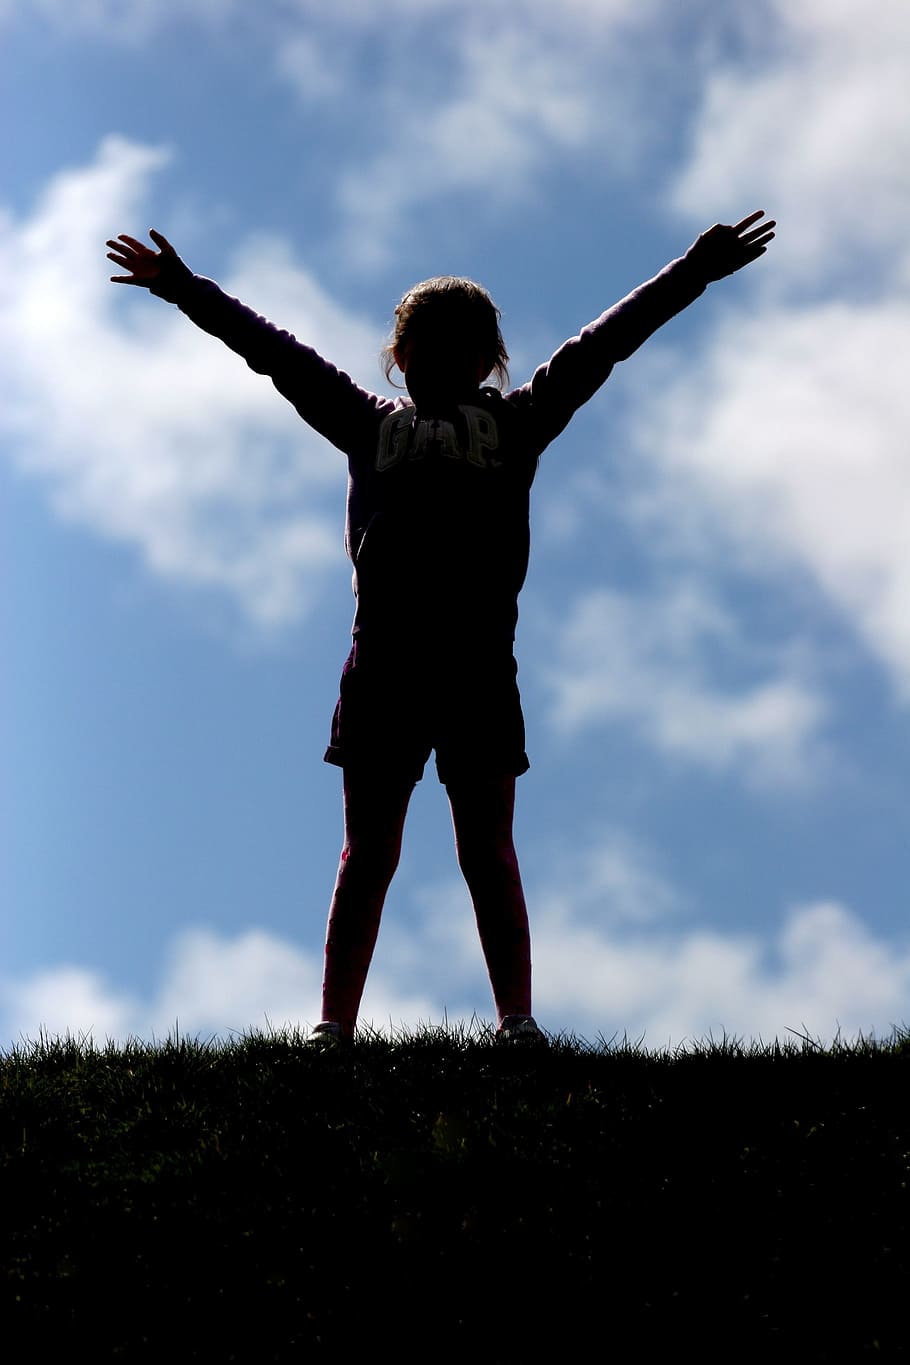 Clouds, Child, happy, human arm, limb, arms raised, human body part, sky, arms outstretched, one person